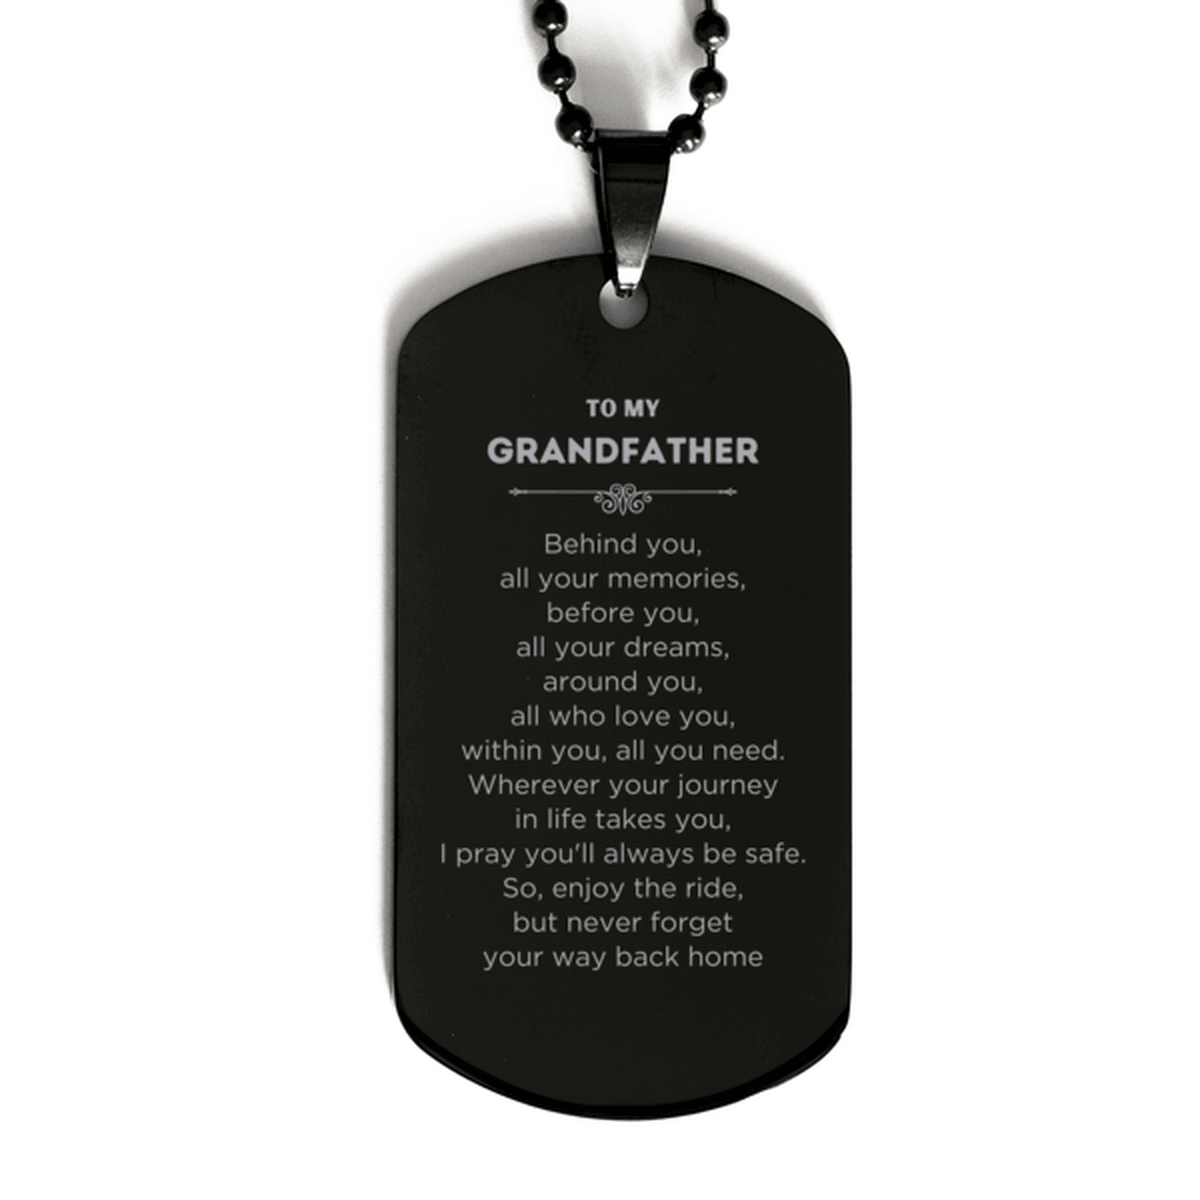 Grandfather Black Dog Tag Necklace Birthday Christmas Unique Gifts Behind you, all your memories, before you, all your dreams - Mallard Moon Gift Shop